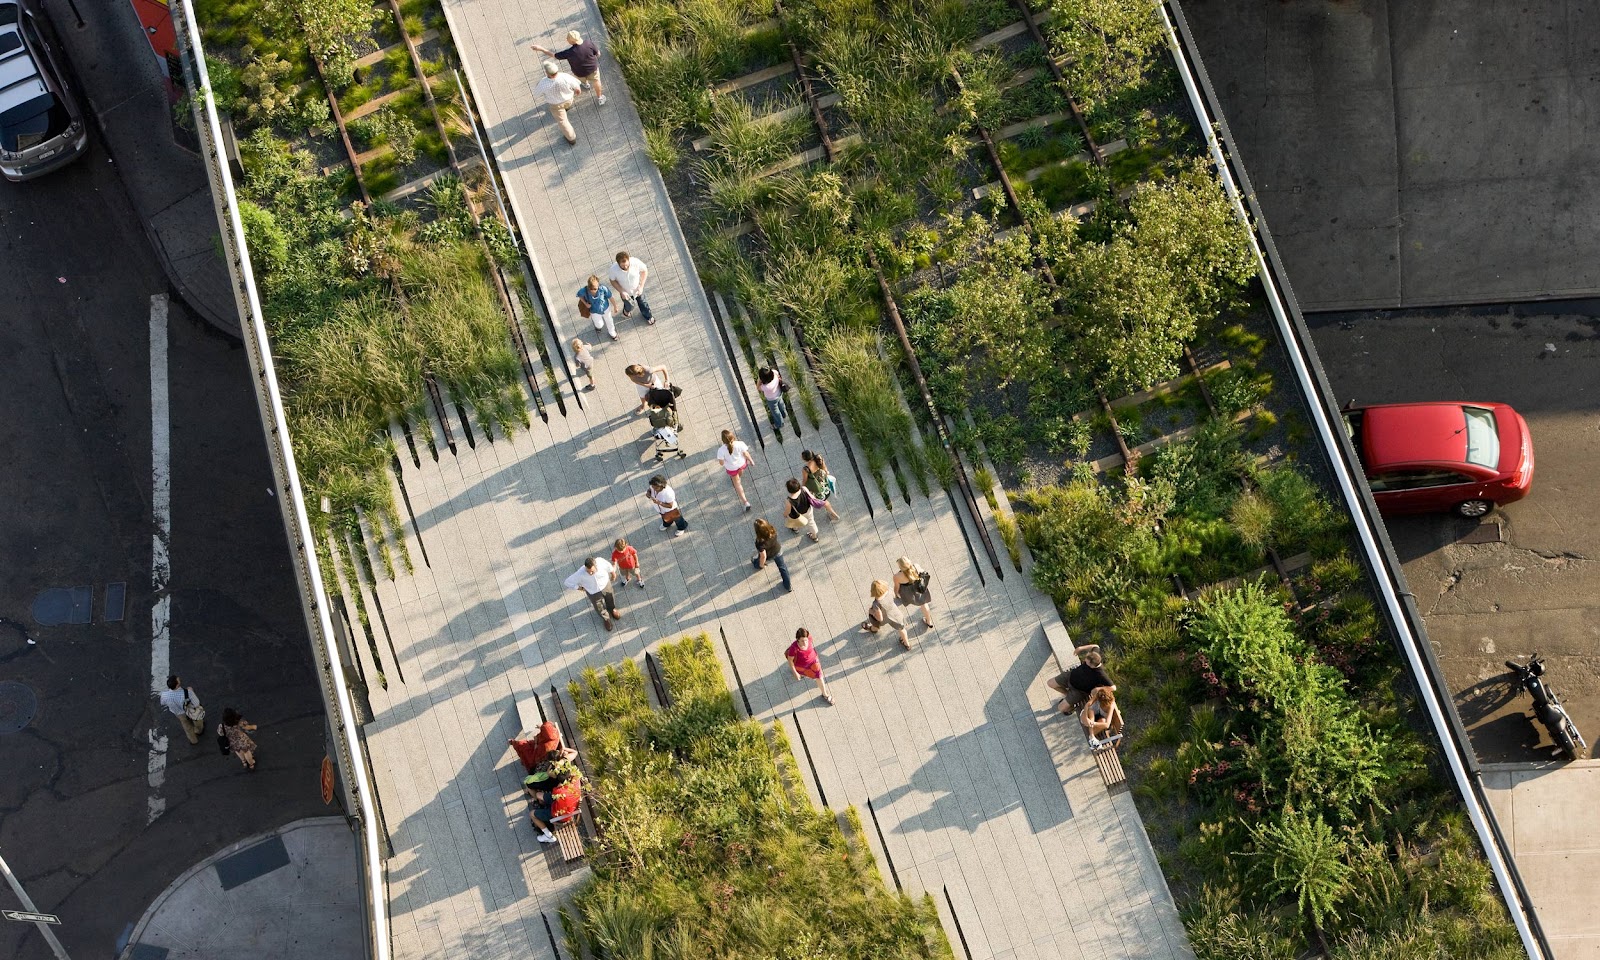 Planting on old Railway Track at the High Line, New York City, USA